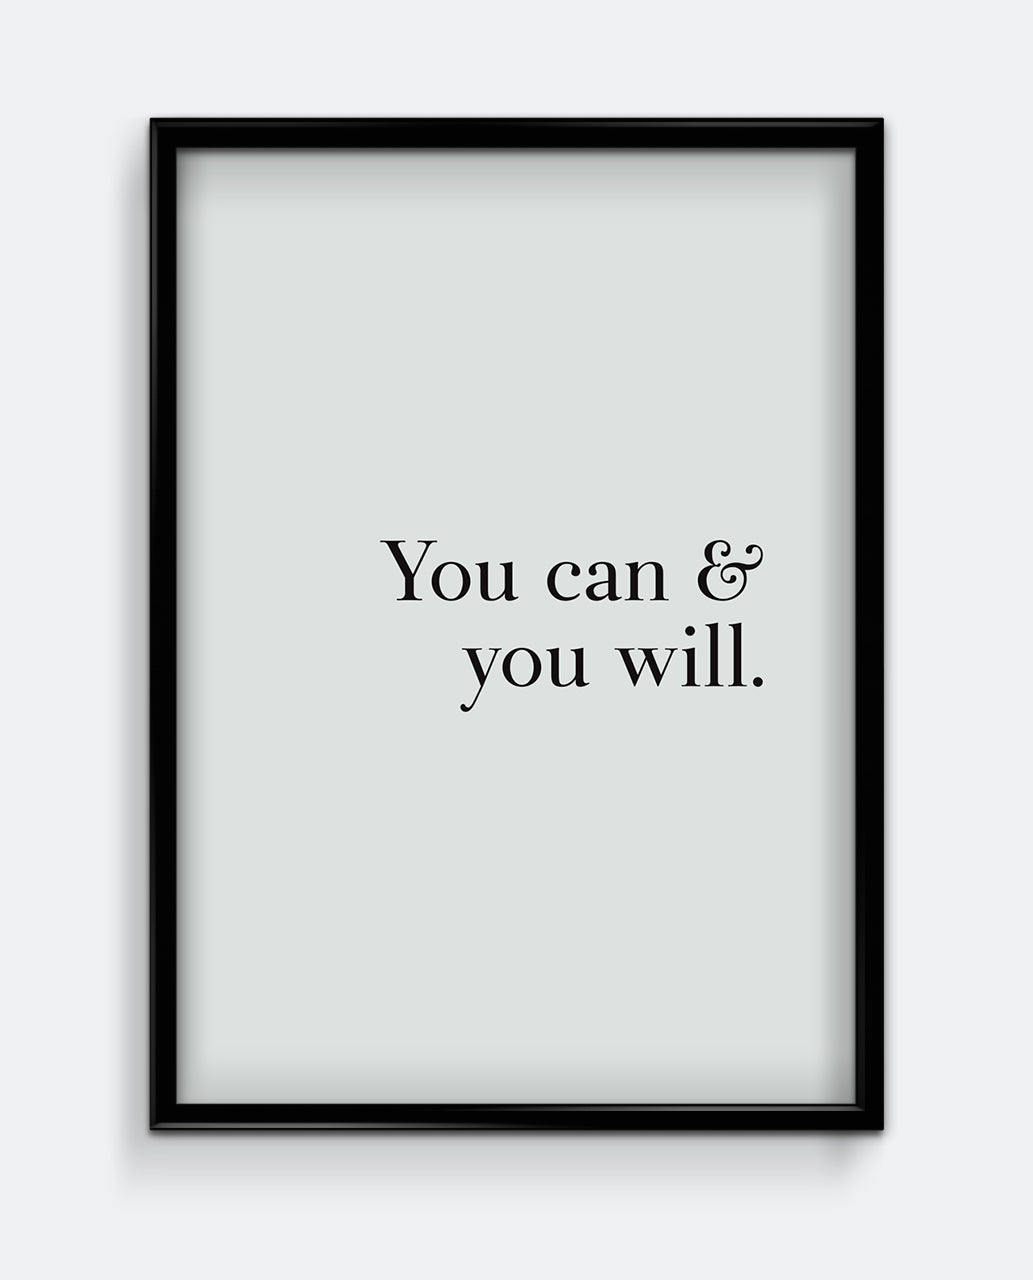 You can & you will.